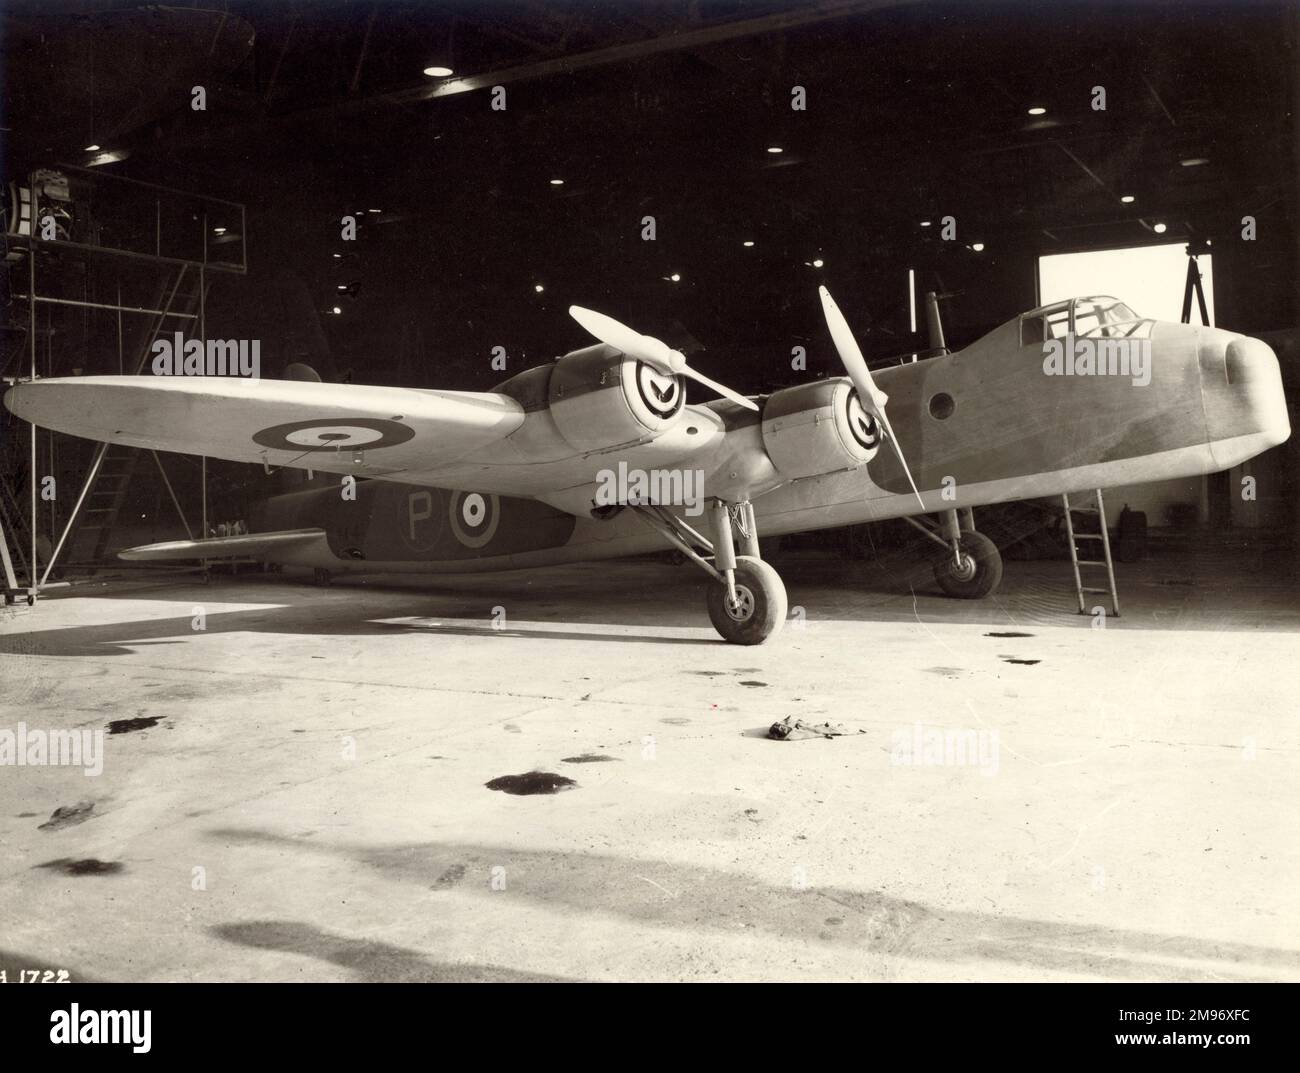 Short S31, M-4, half-scale wooden prototype of the Stirling bomber. Powered by four Pobjoy Niagra radials. Stock Photo